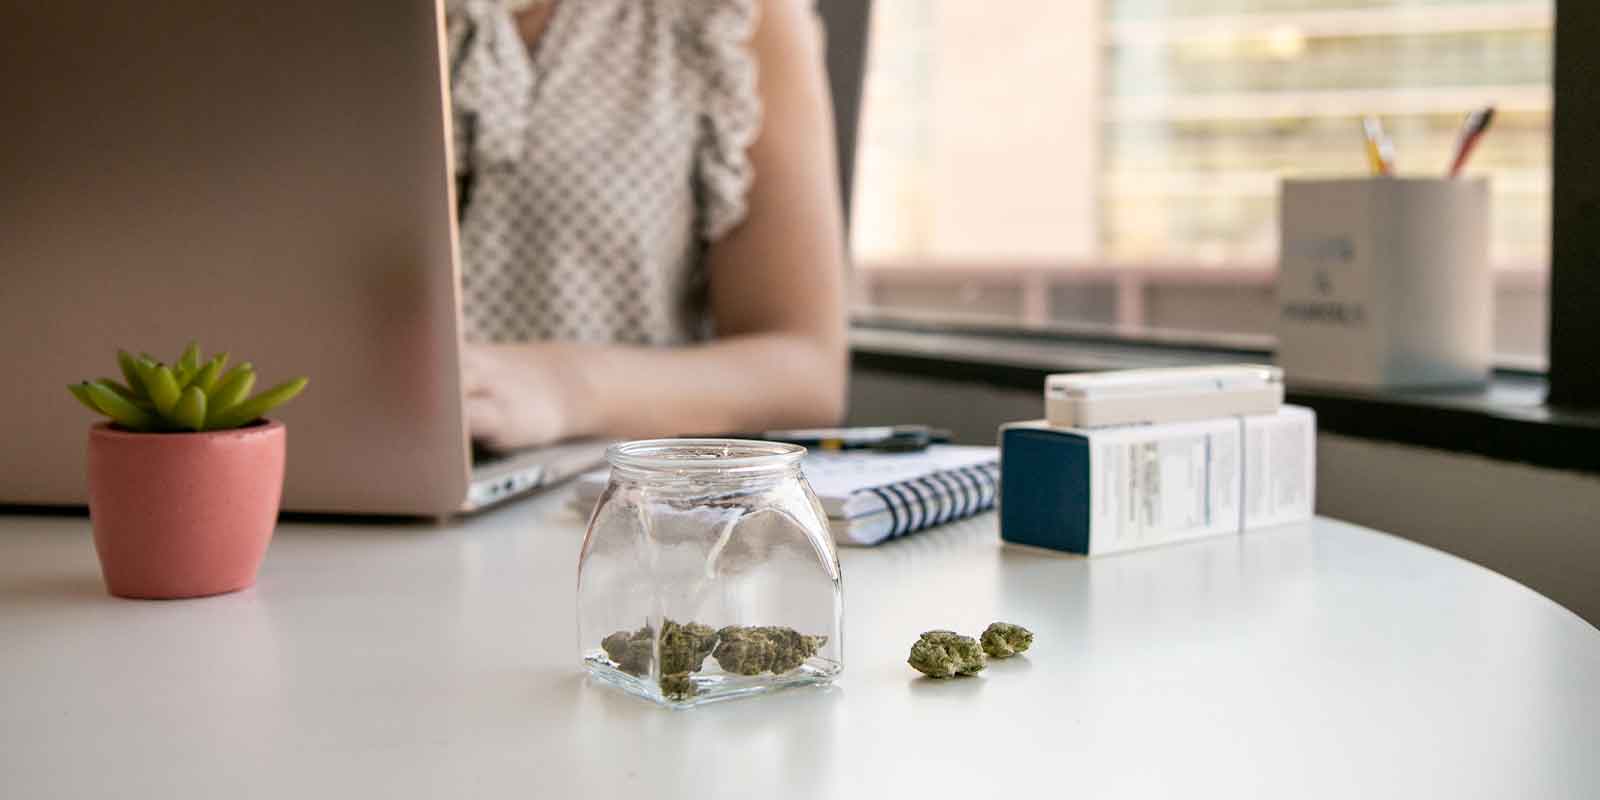 women in meeting about cannabis while at home